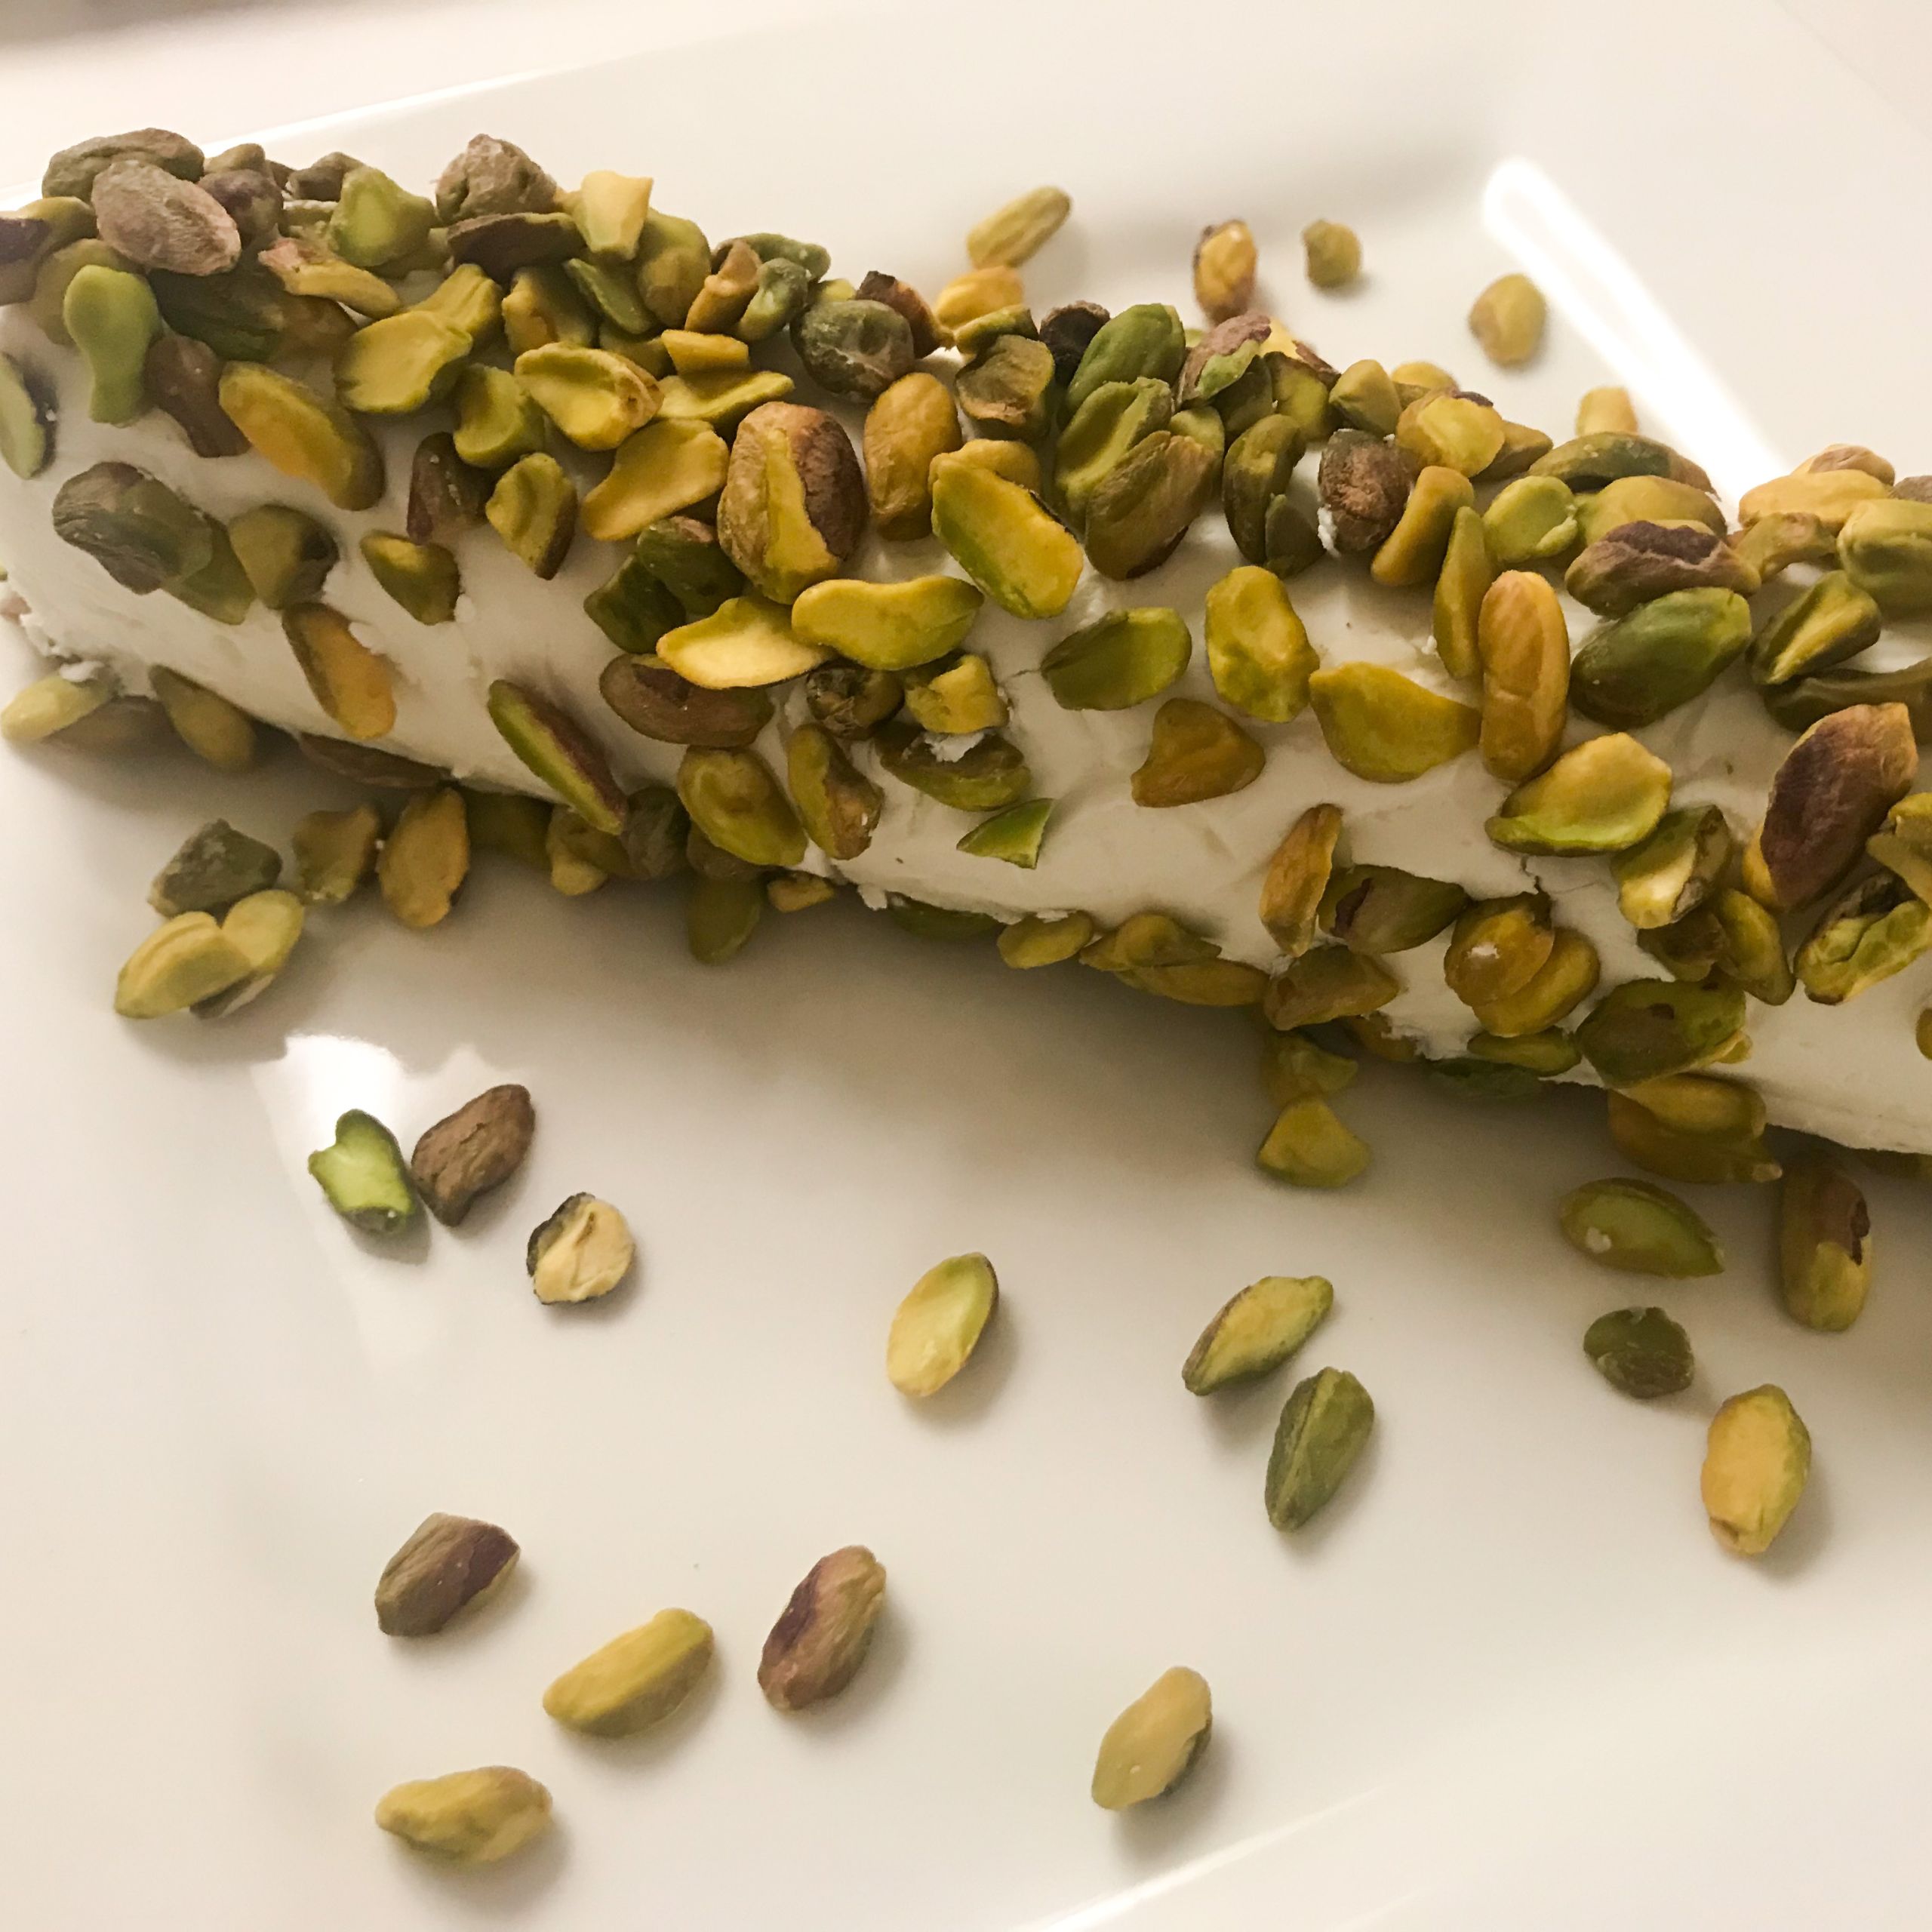 log of goat cheese covered in pistachios on a plate